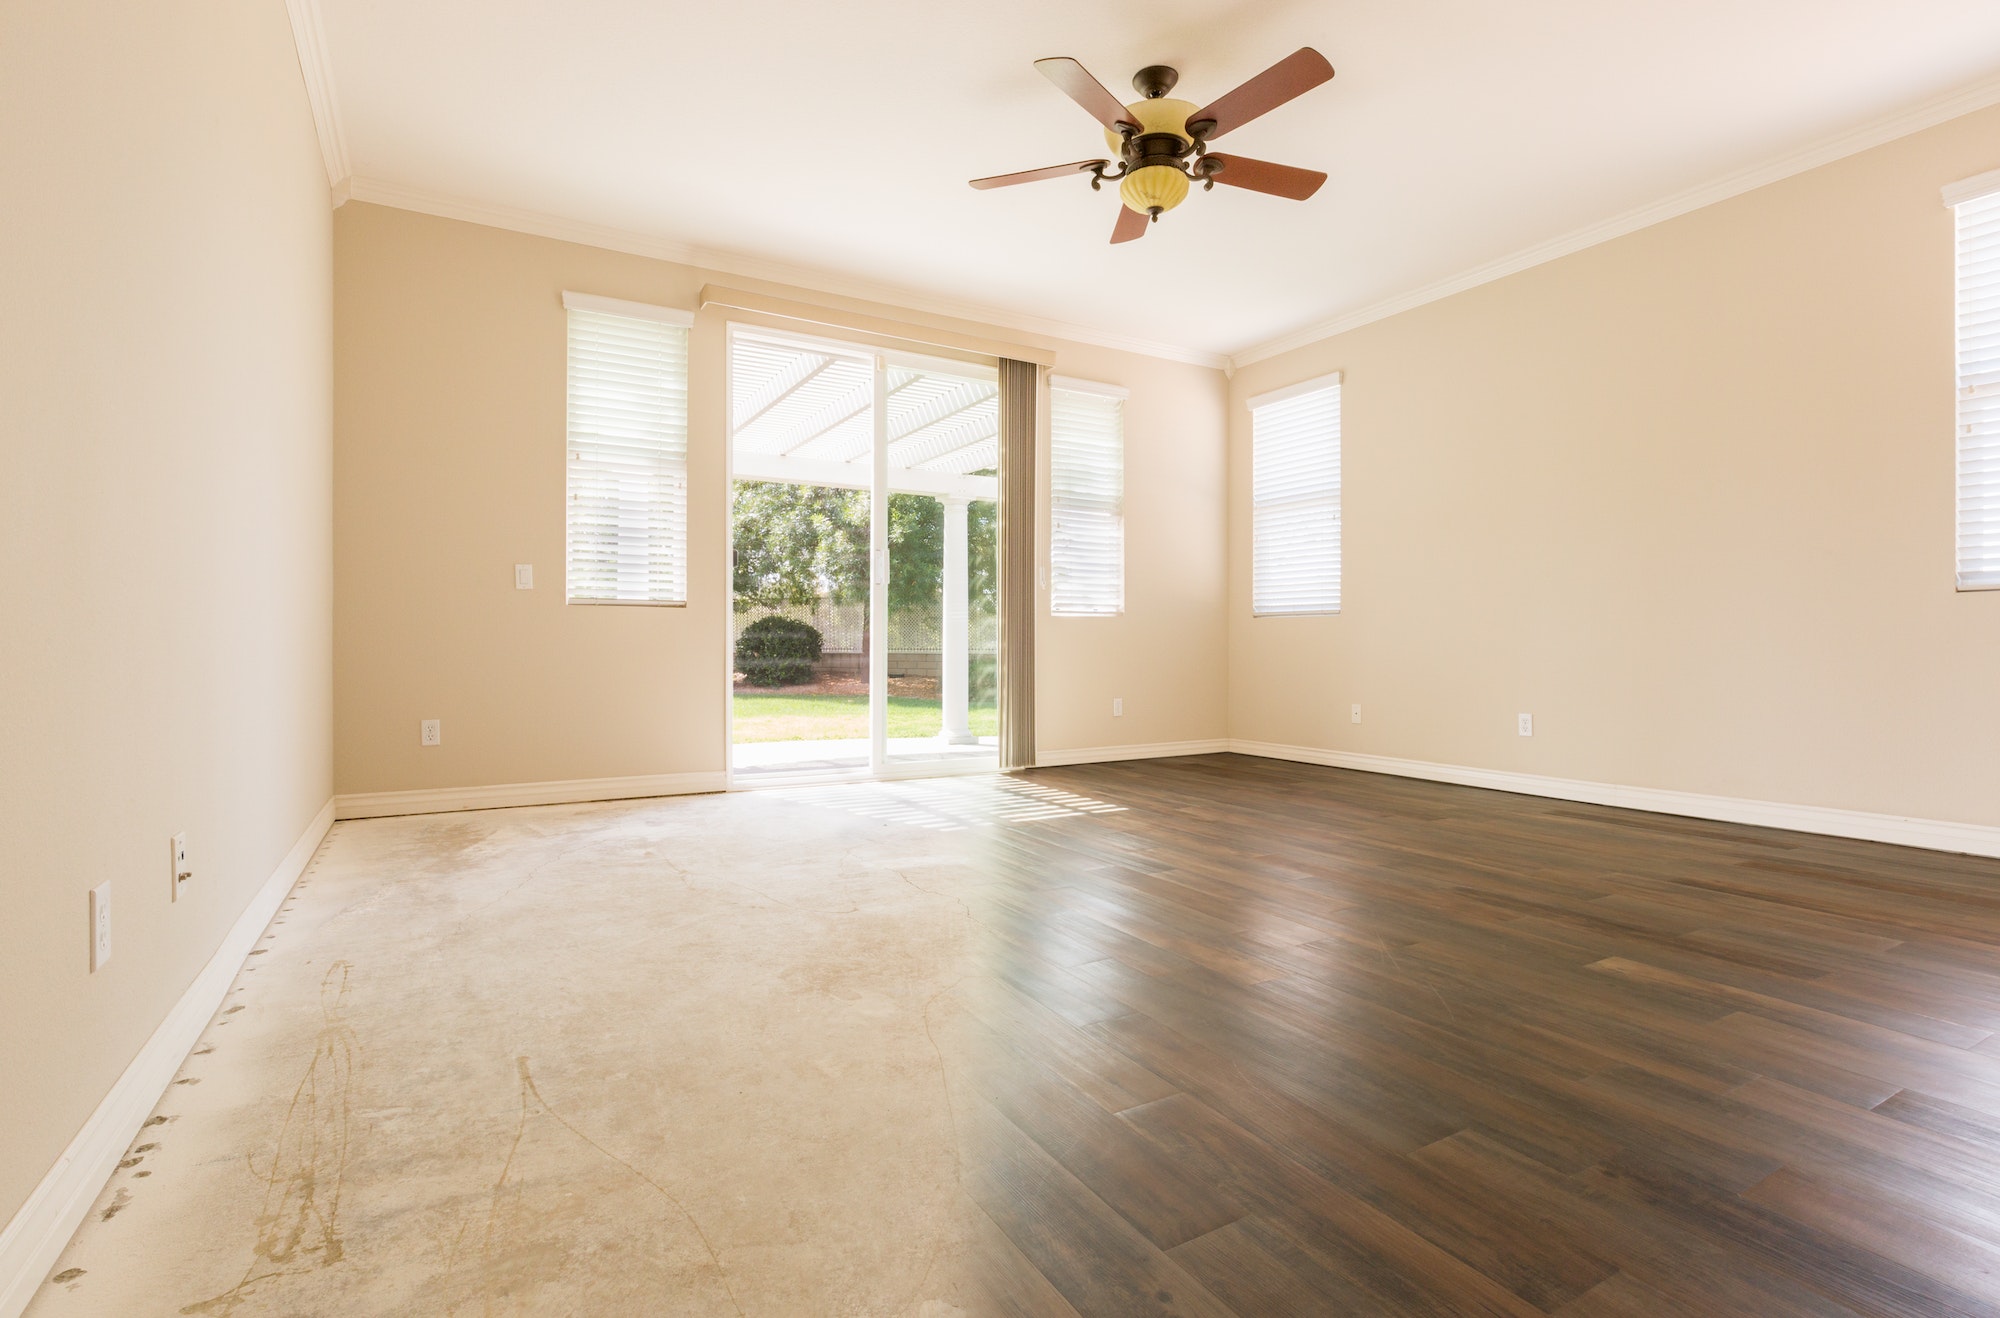 Room with Gradation from Cement Floors to Hardwood Flooring Installed.